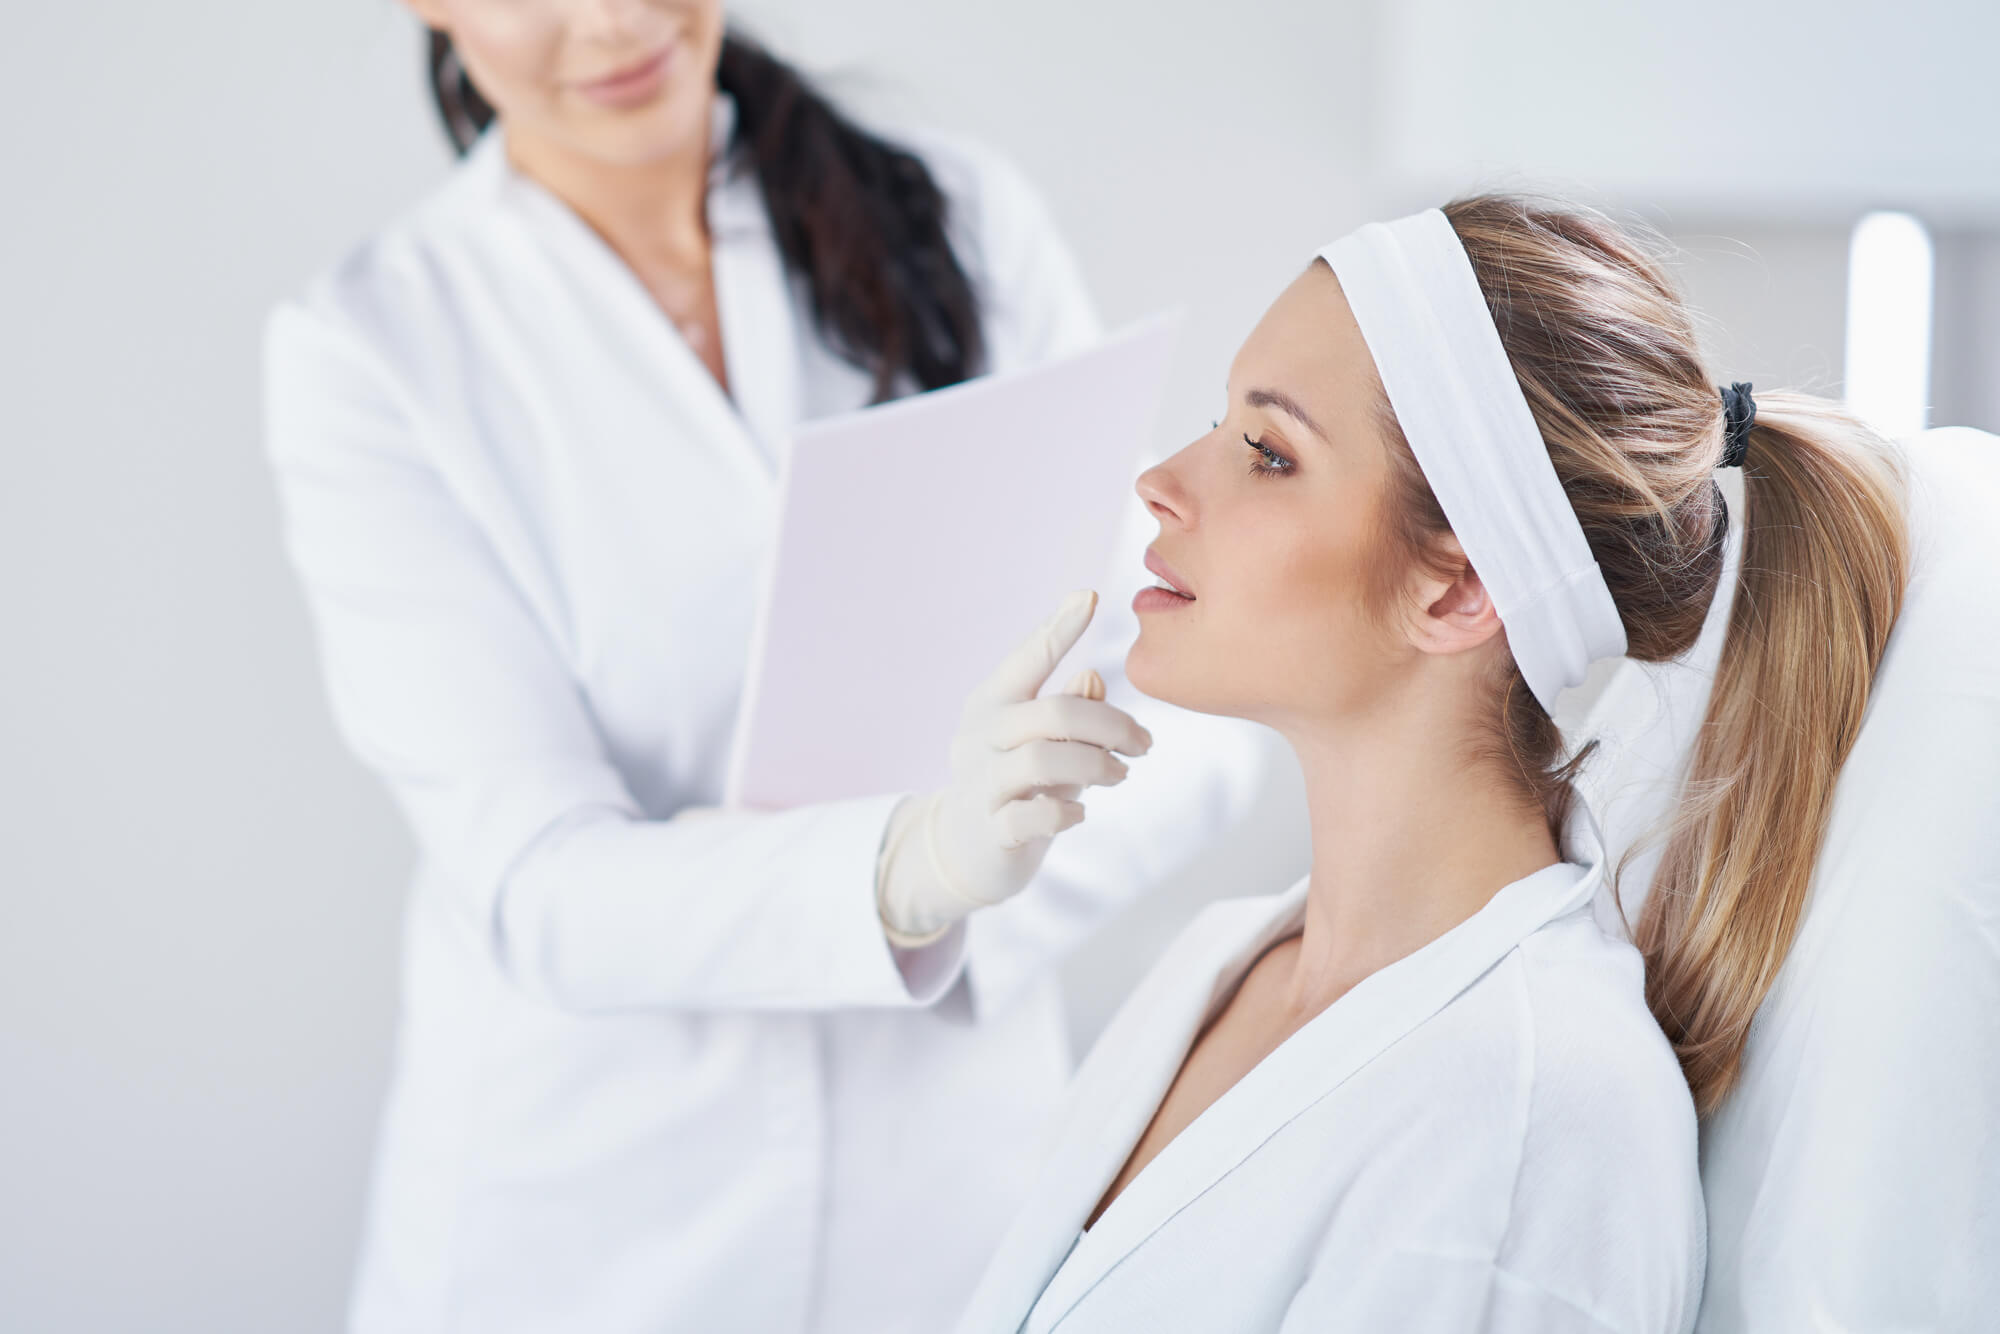 What are some of the traditional non-surgical treatments?